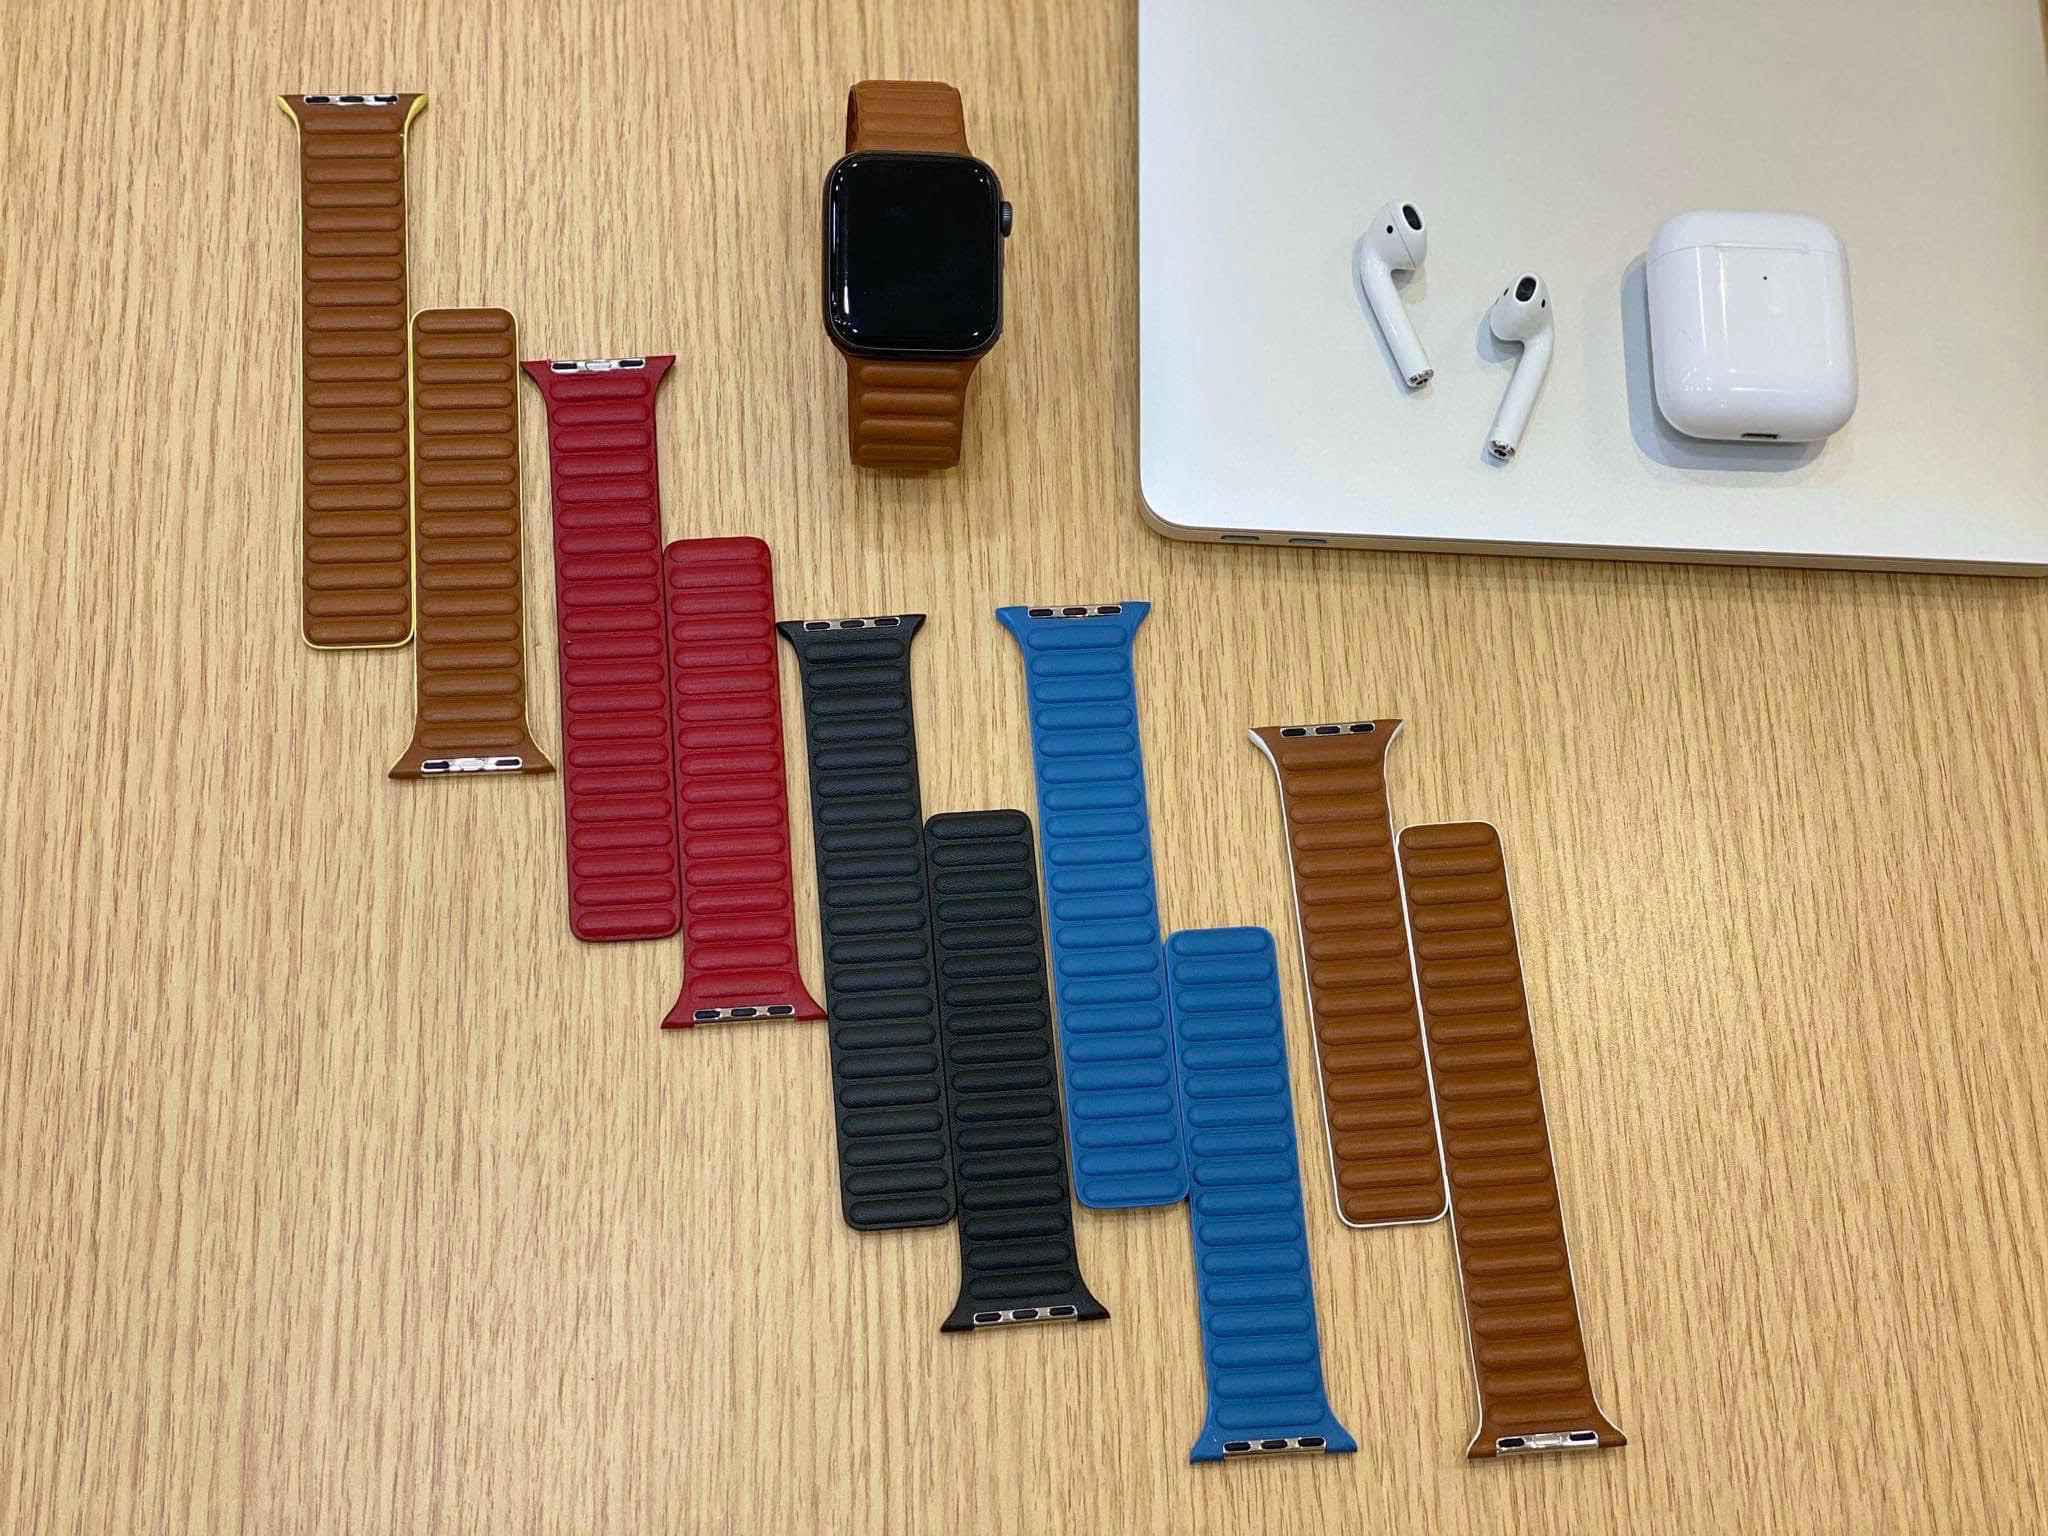 https://www.imore.com/sites/imore.com/files/styles/large/public/field/image/2020/05/apple-watch-leather-loop.jpg?itok=hu3_q2r8